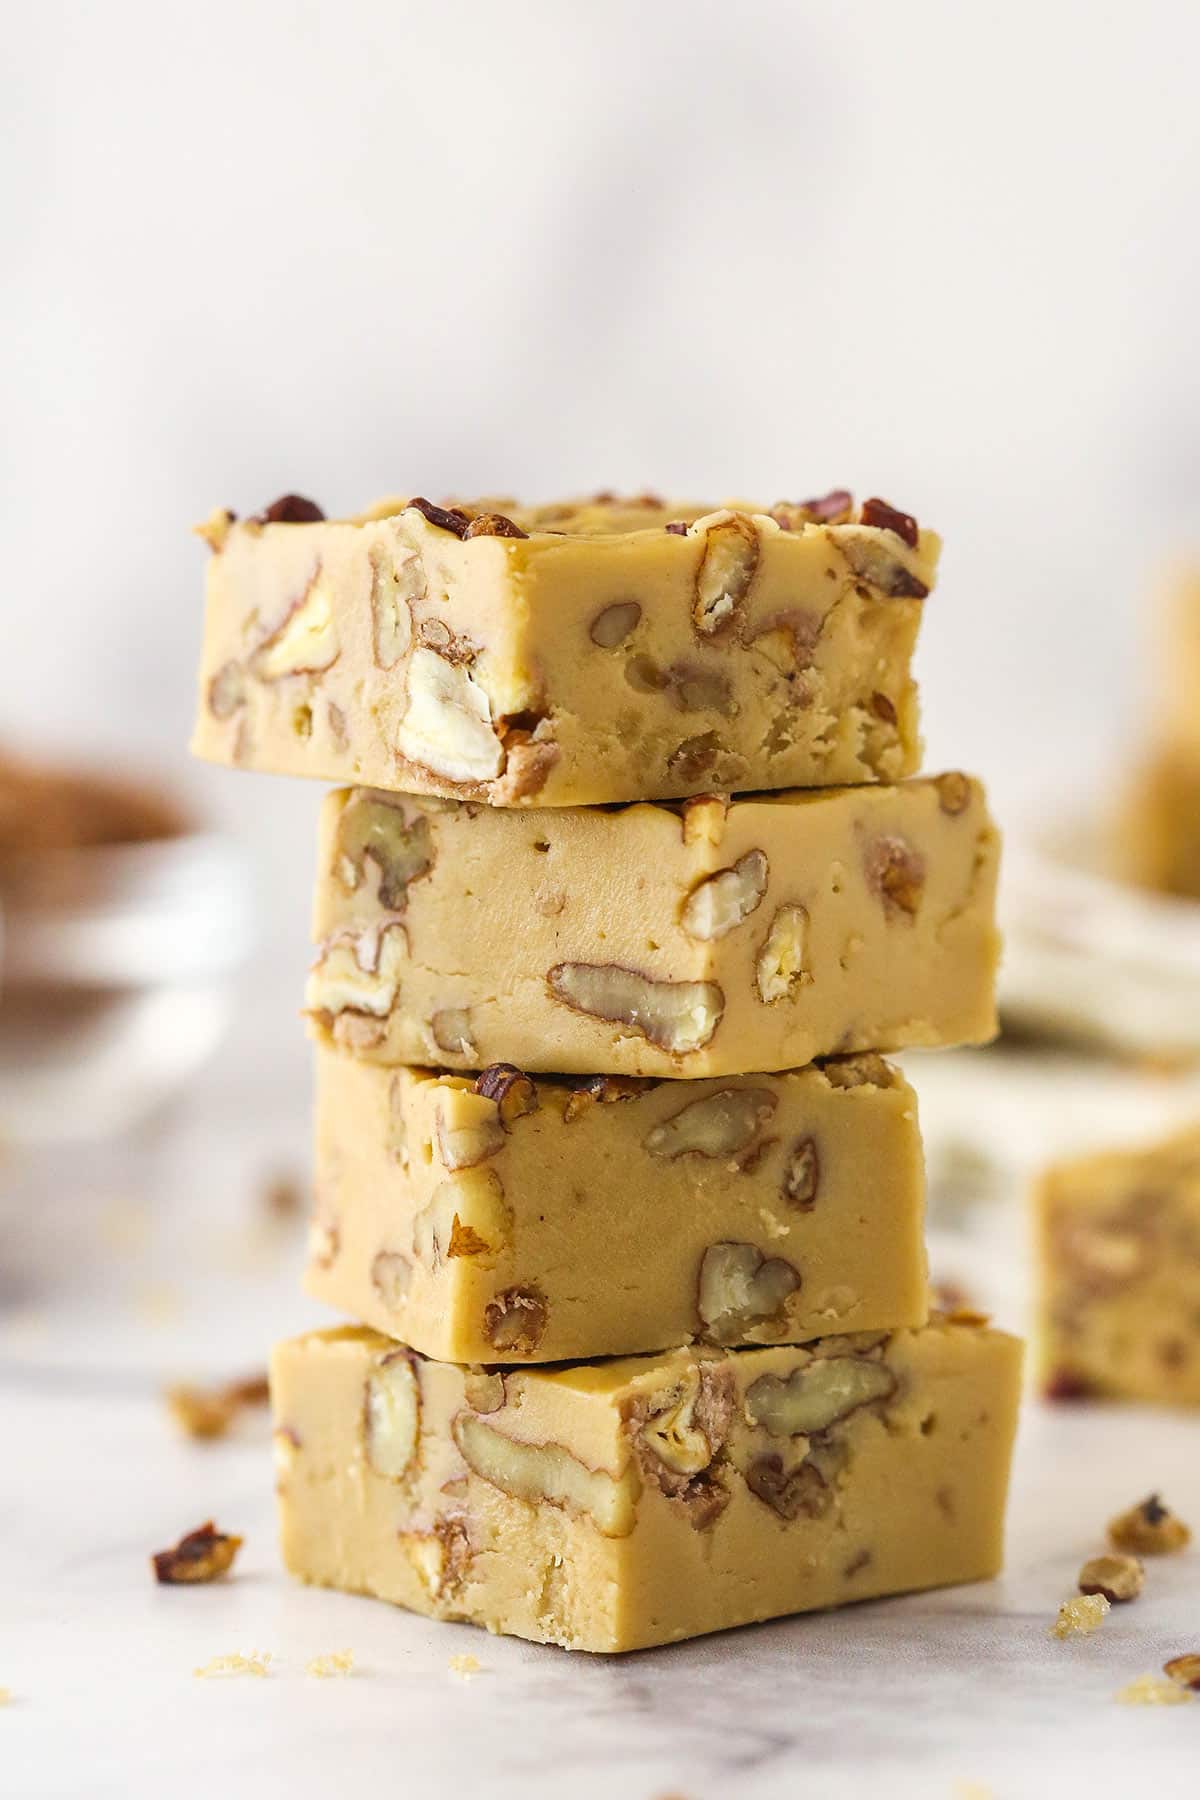 4 pieces of Praline Pecan Fudge stacked one on top of the other.